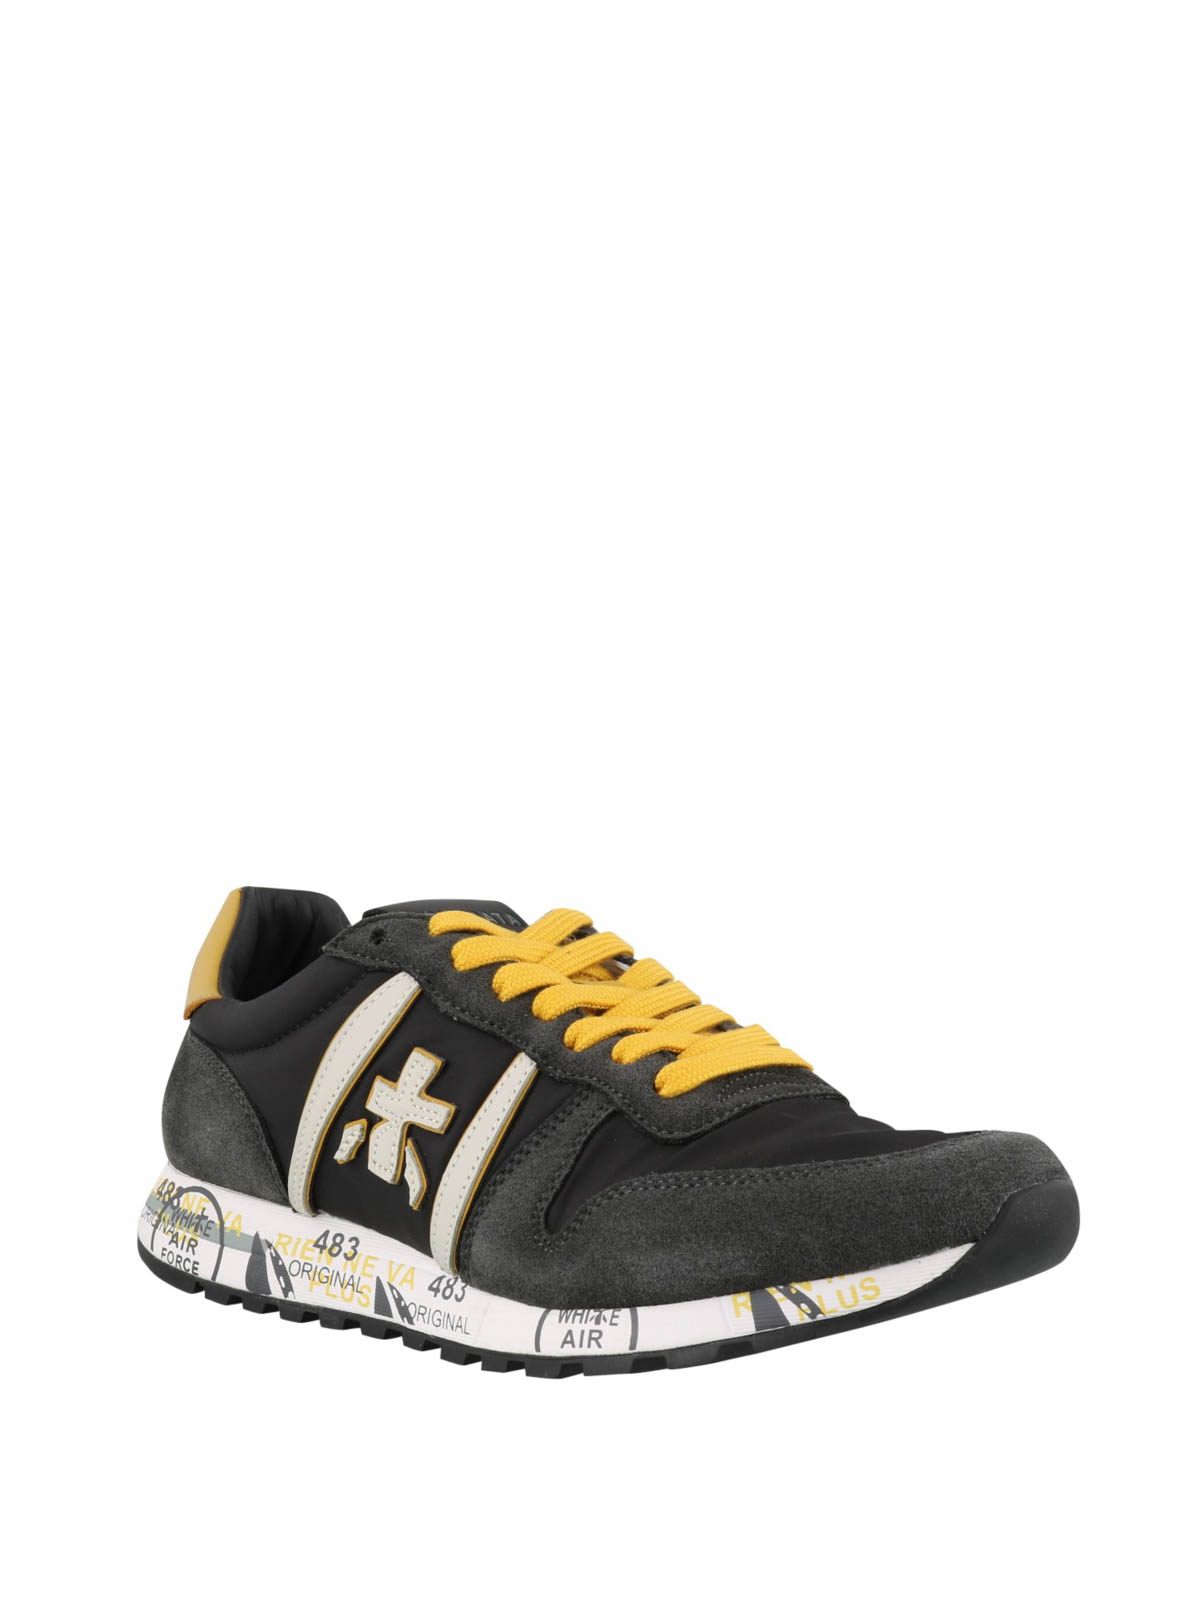 Premiata - Eric 4944 sneakers - trainers - ERIC4944 | Shop online at iKRIX